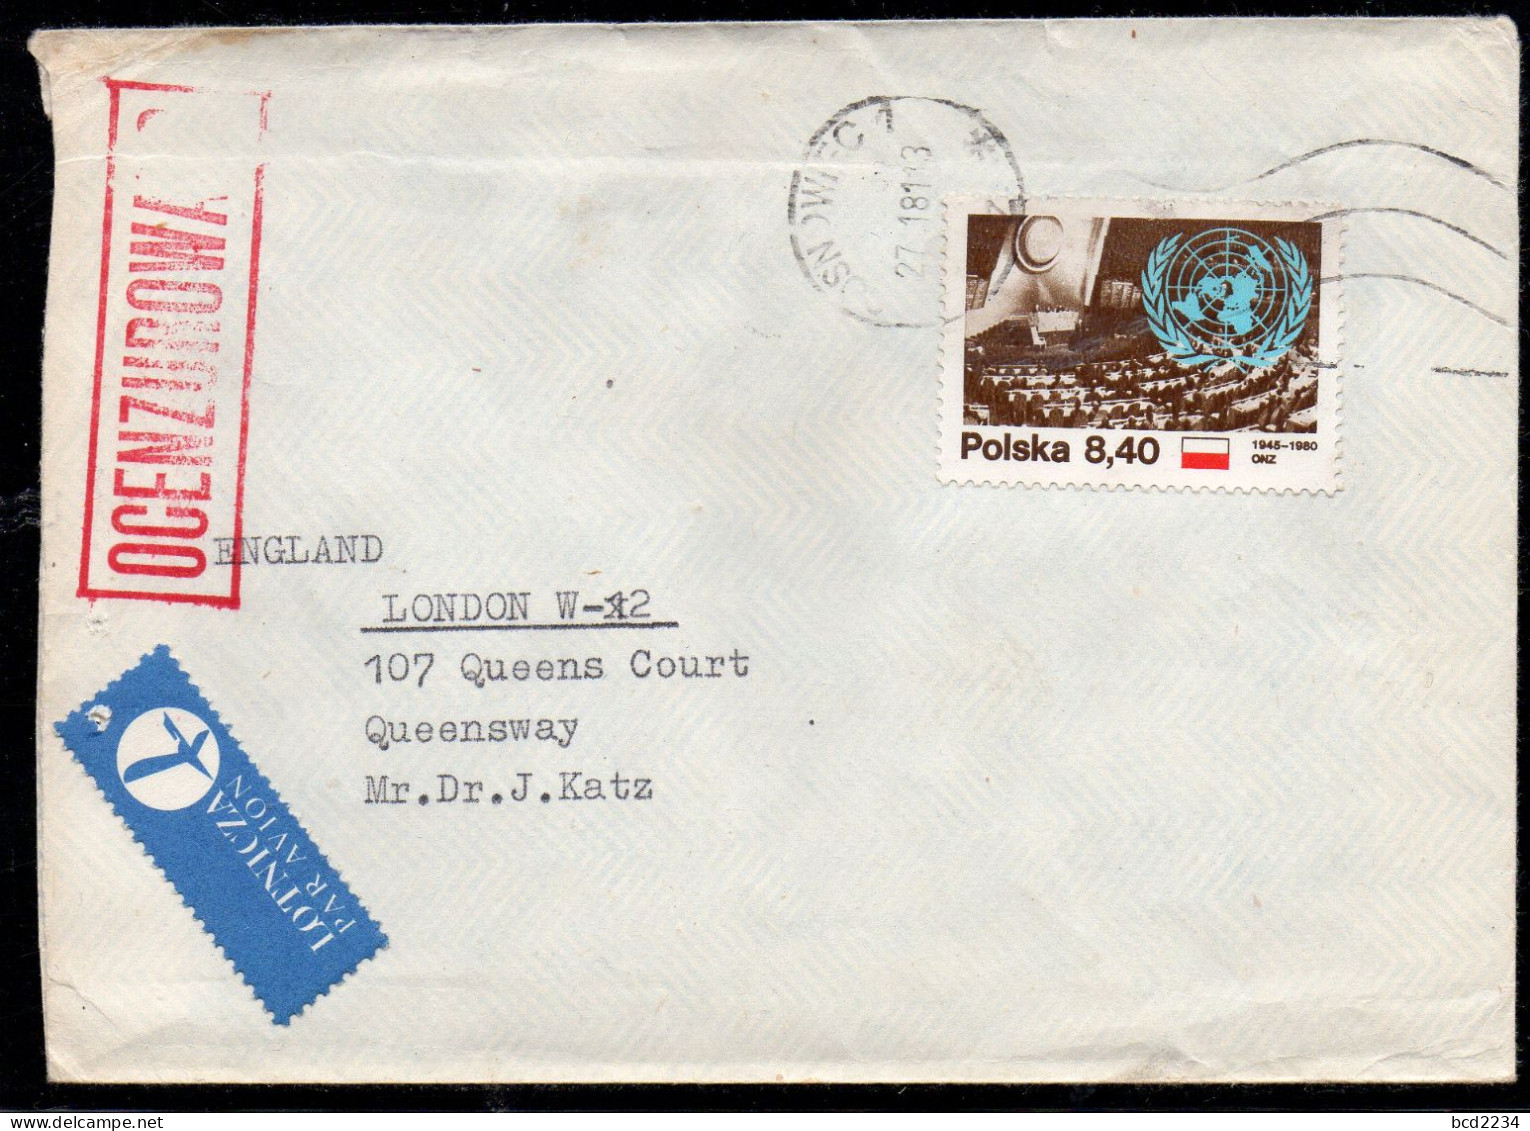 POLAND 1981 SOLIDARITY SOLIDARNOSC PERIOD MARTIAL LAW OCENZUROWANO CENSORED RED CACHET WITH NO NUMBER SOSNOWIEC TO UK - Storia Postale